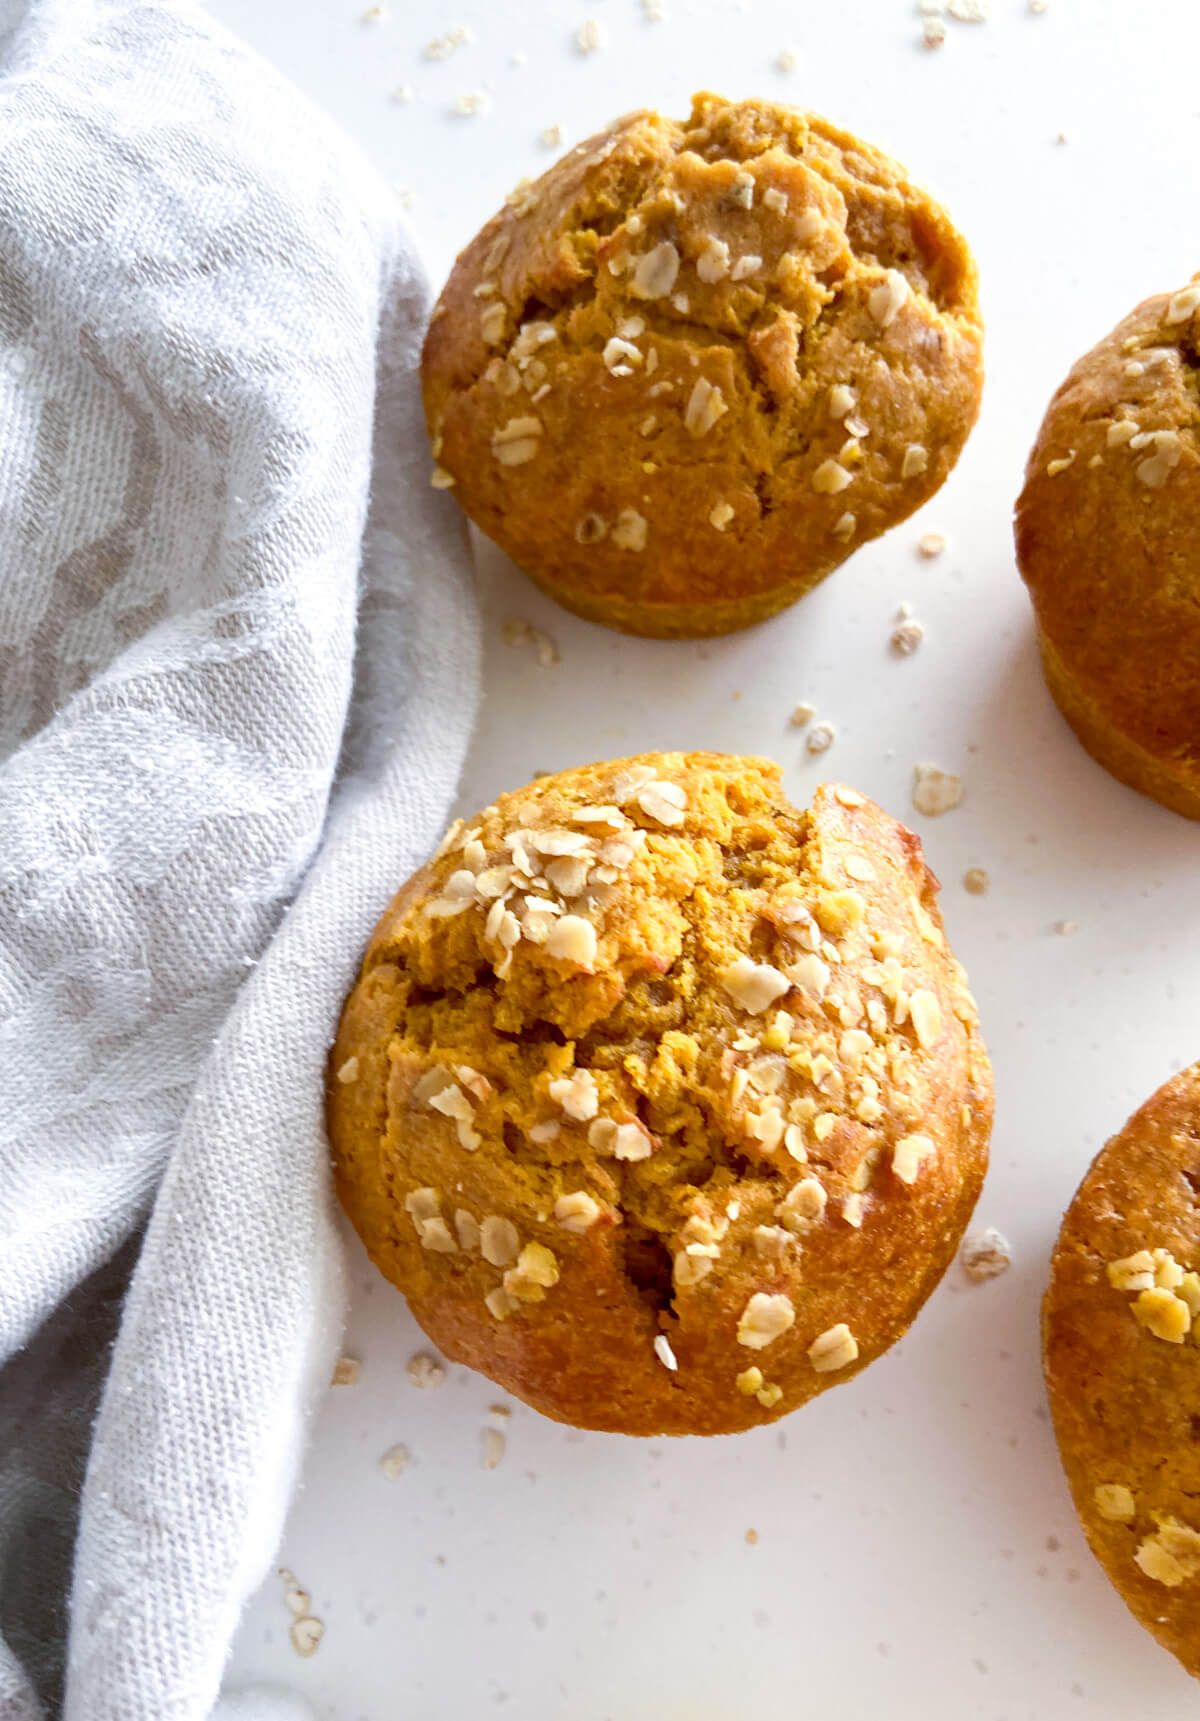 Baked muffin with oats on top.